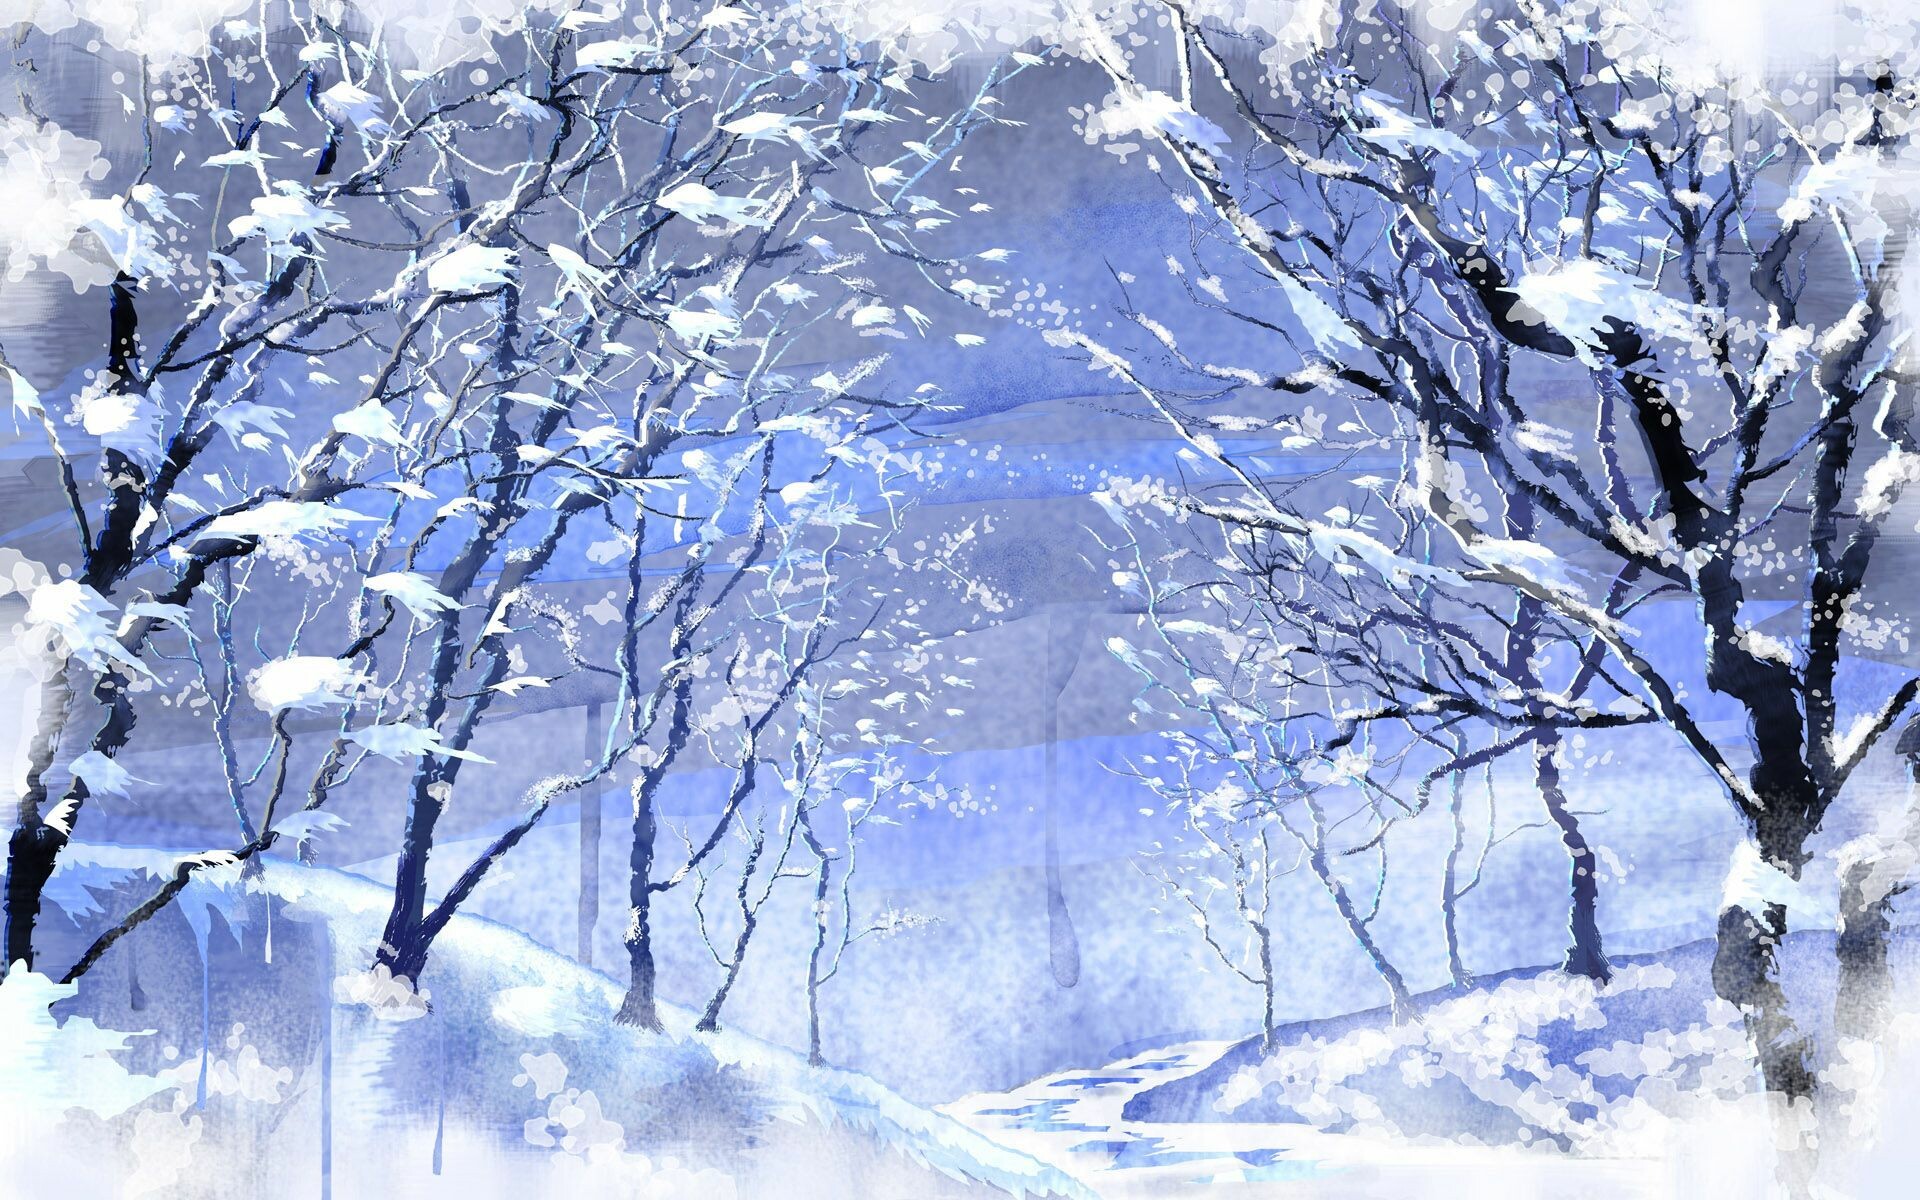 Winter Scenery Wallpaper: HD, 4K, 5K for PC and Mobile. Download free image for iPhone, Android